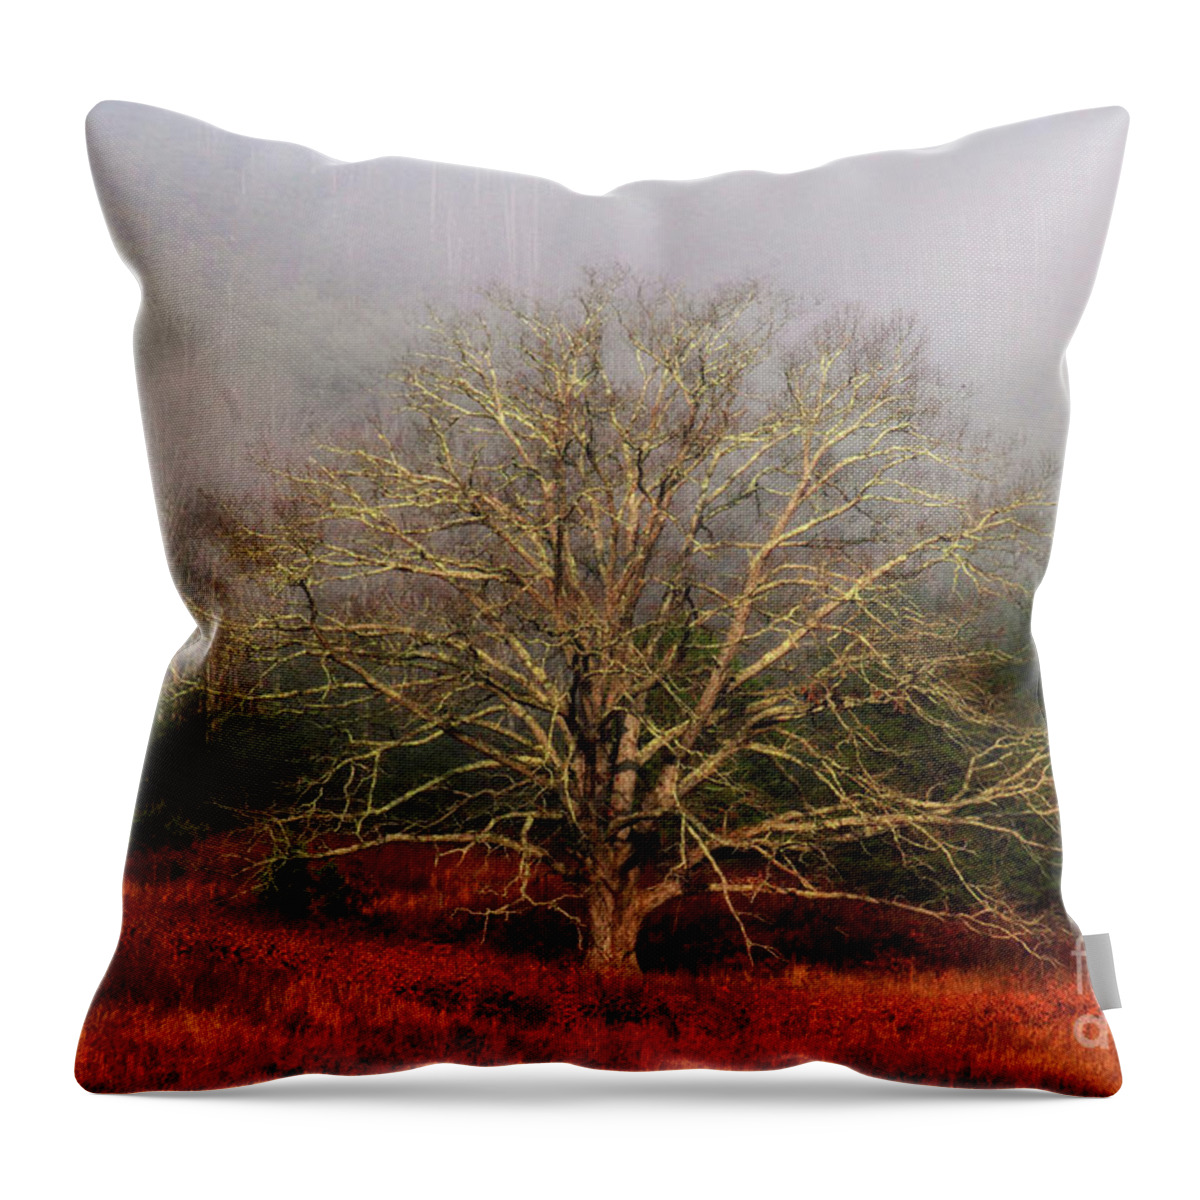 Fog Throw Pillow featuring the photograph Fog Tree by Geraldine DeBoer